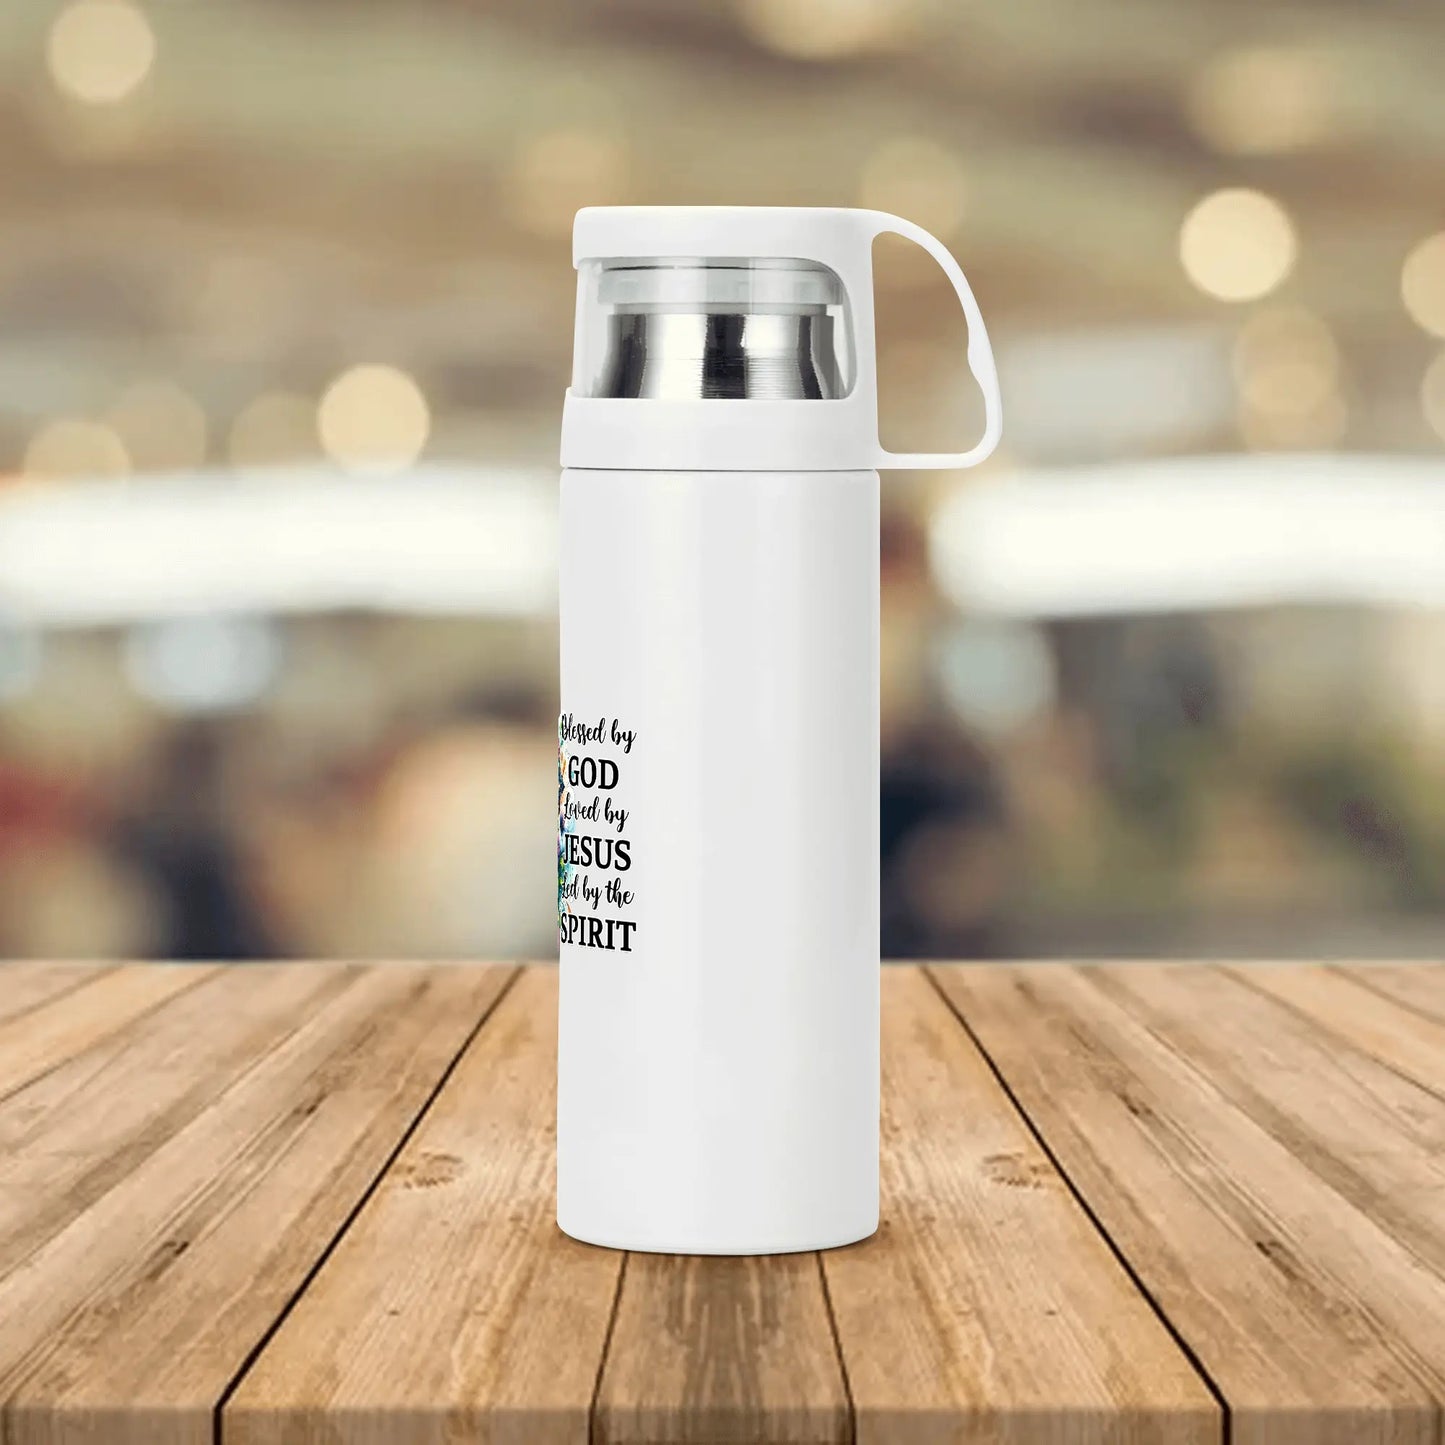 Blessed by God Loved by Jesus Led by the Holy Spirit Christian Vacuum Water Bottle with Cup popcustoms